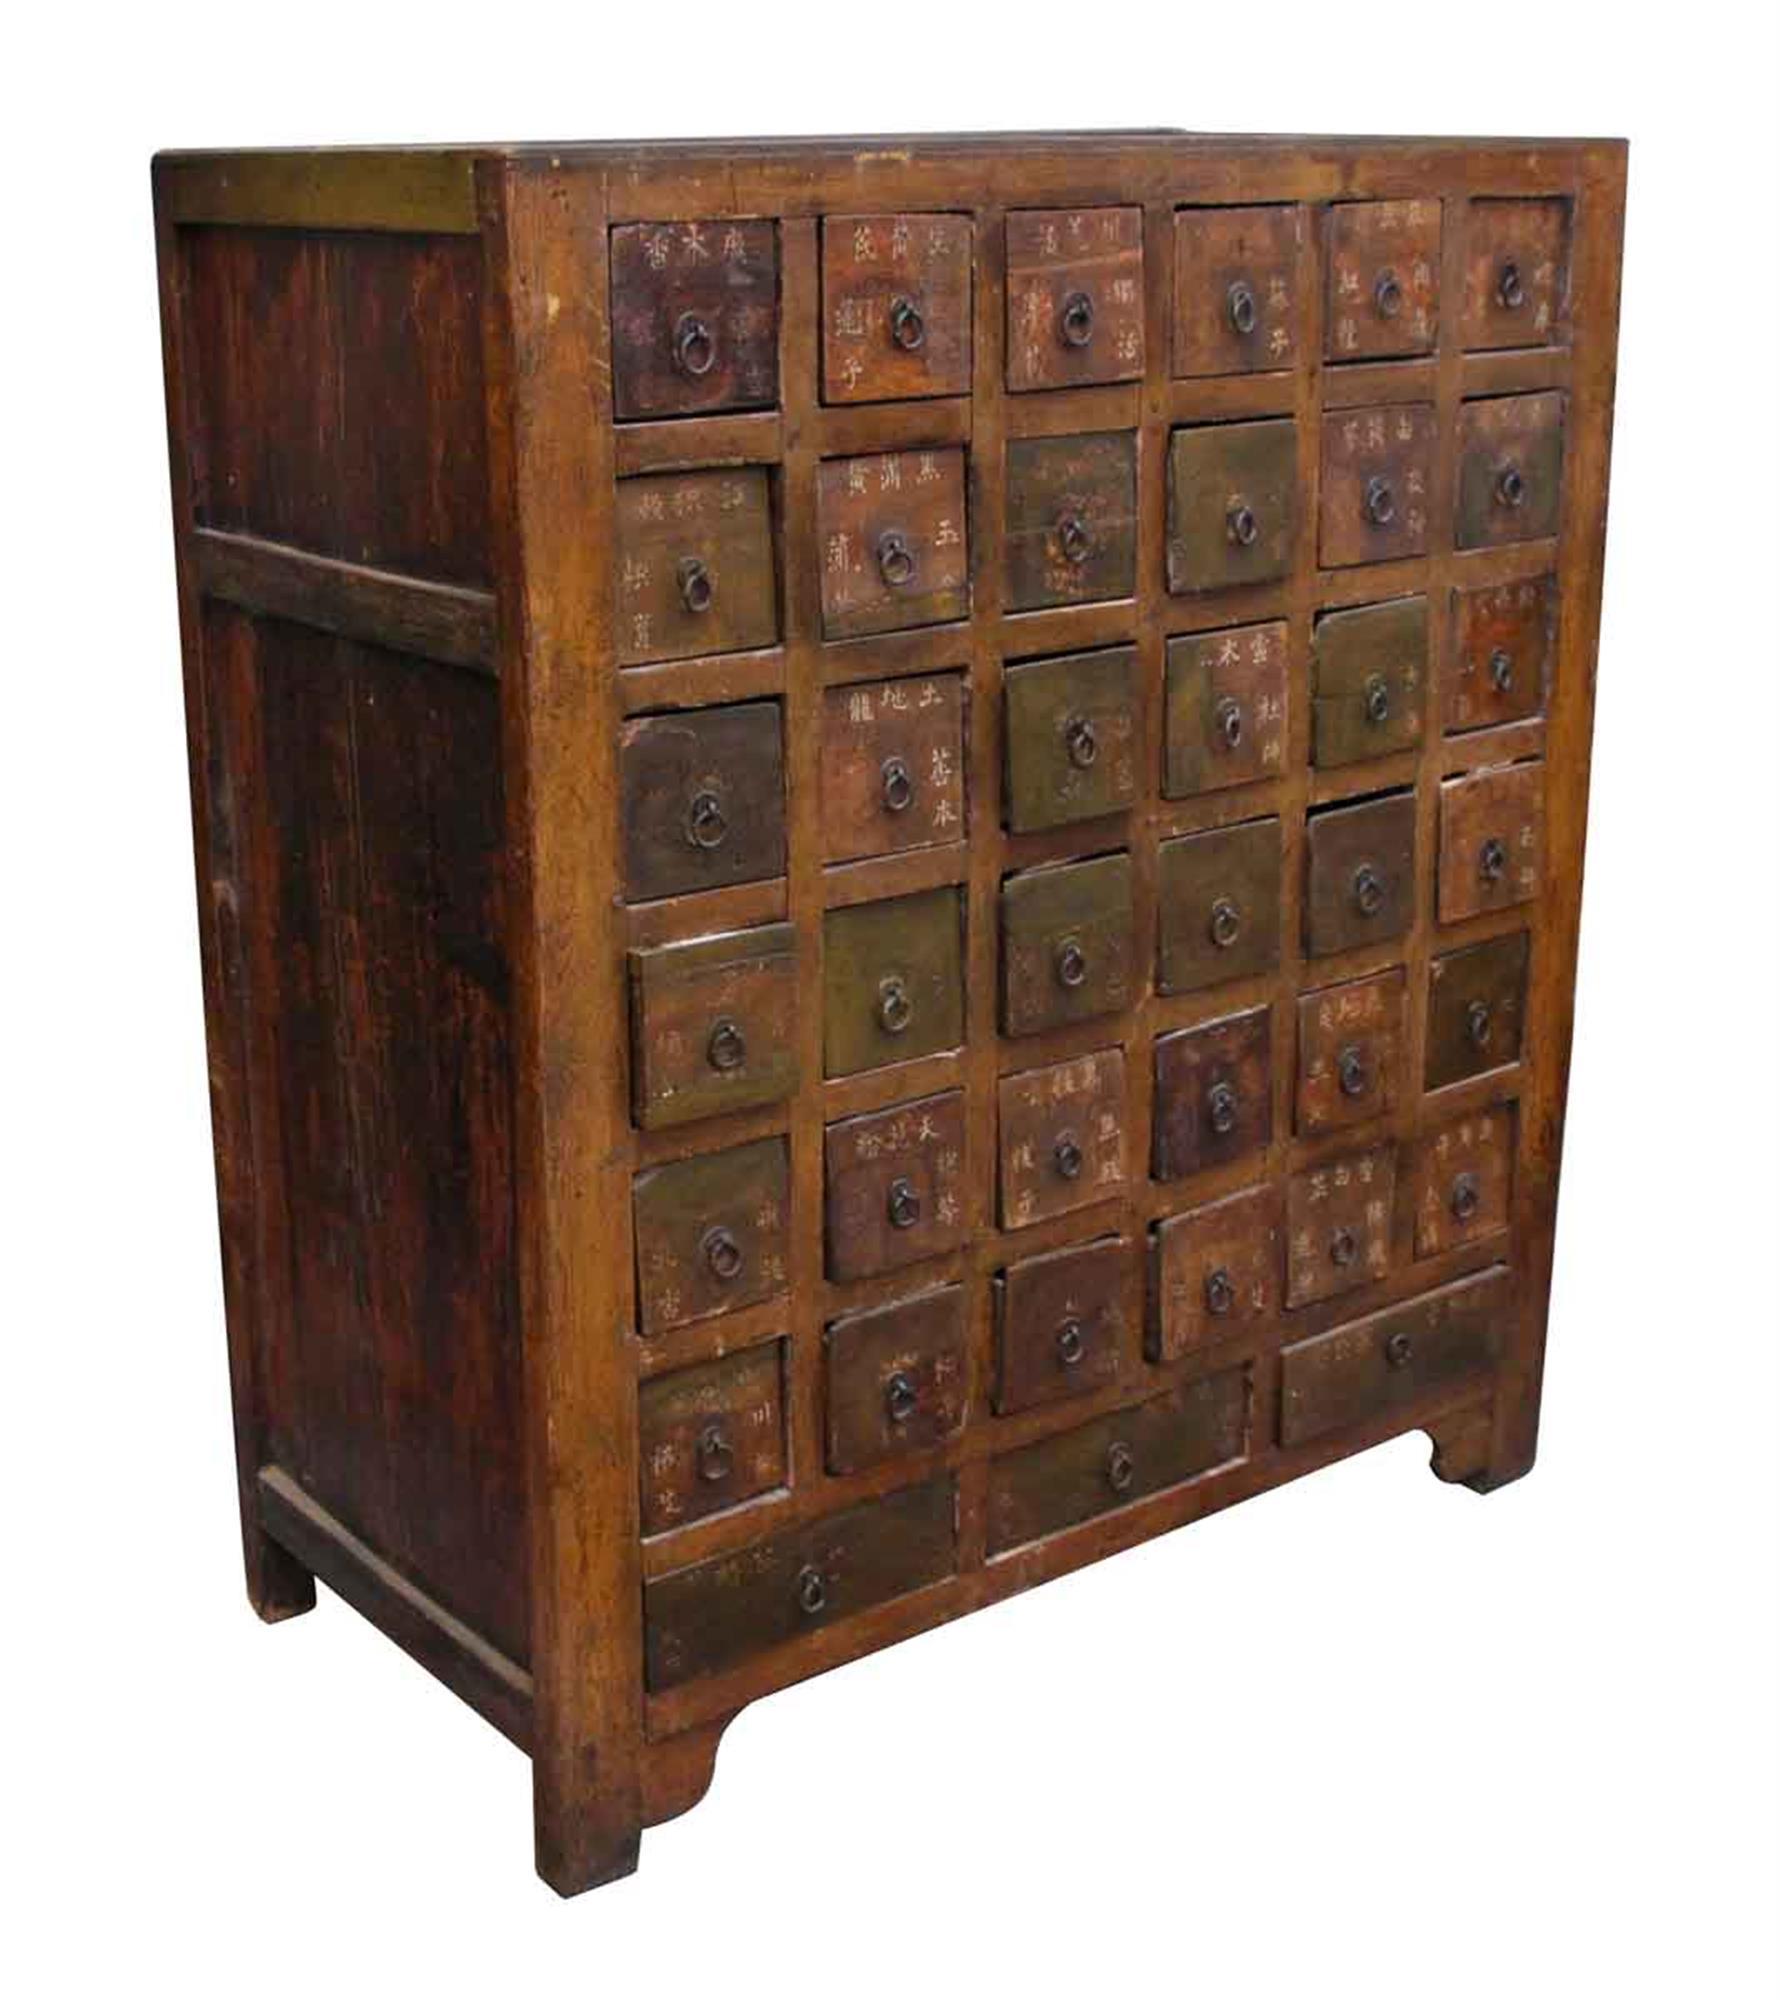 Truly an amazing piece, this cabinet was once used for herbs and other medicinal uses in Chinese medicine. 36 drawers. The top and back needs repair. This can be seen at our 5 East 16th St location on Union Square in Manhattan.